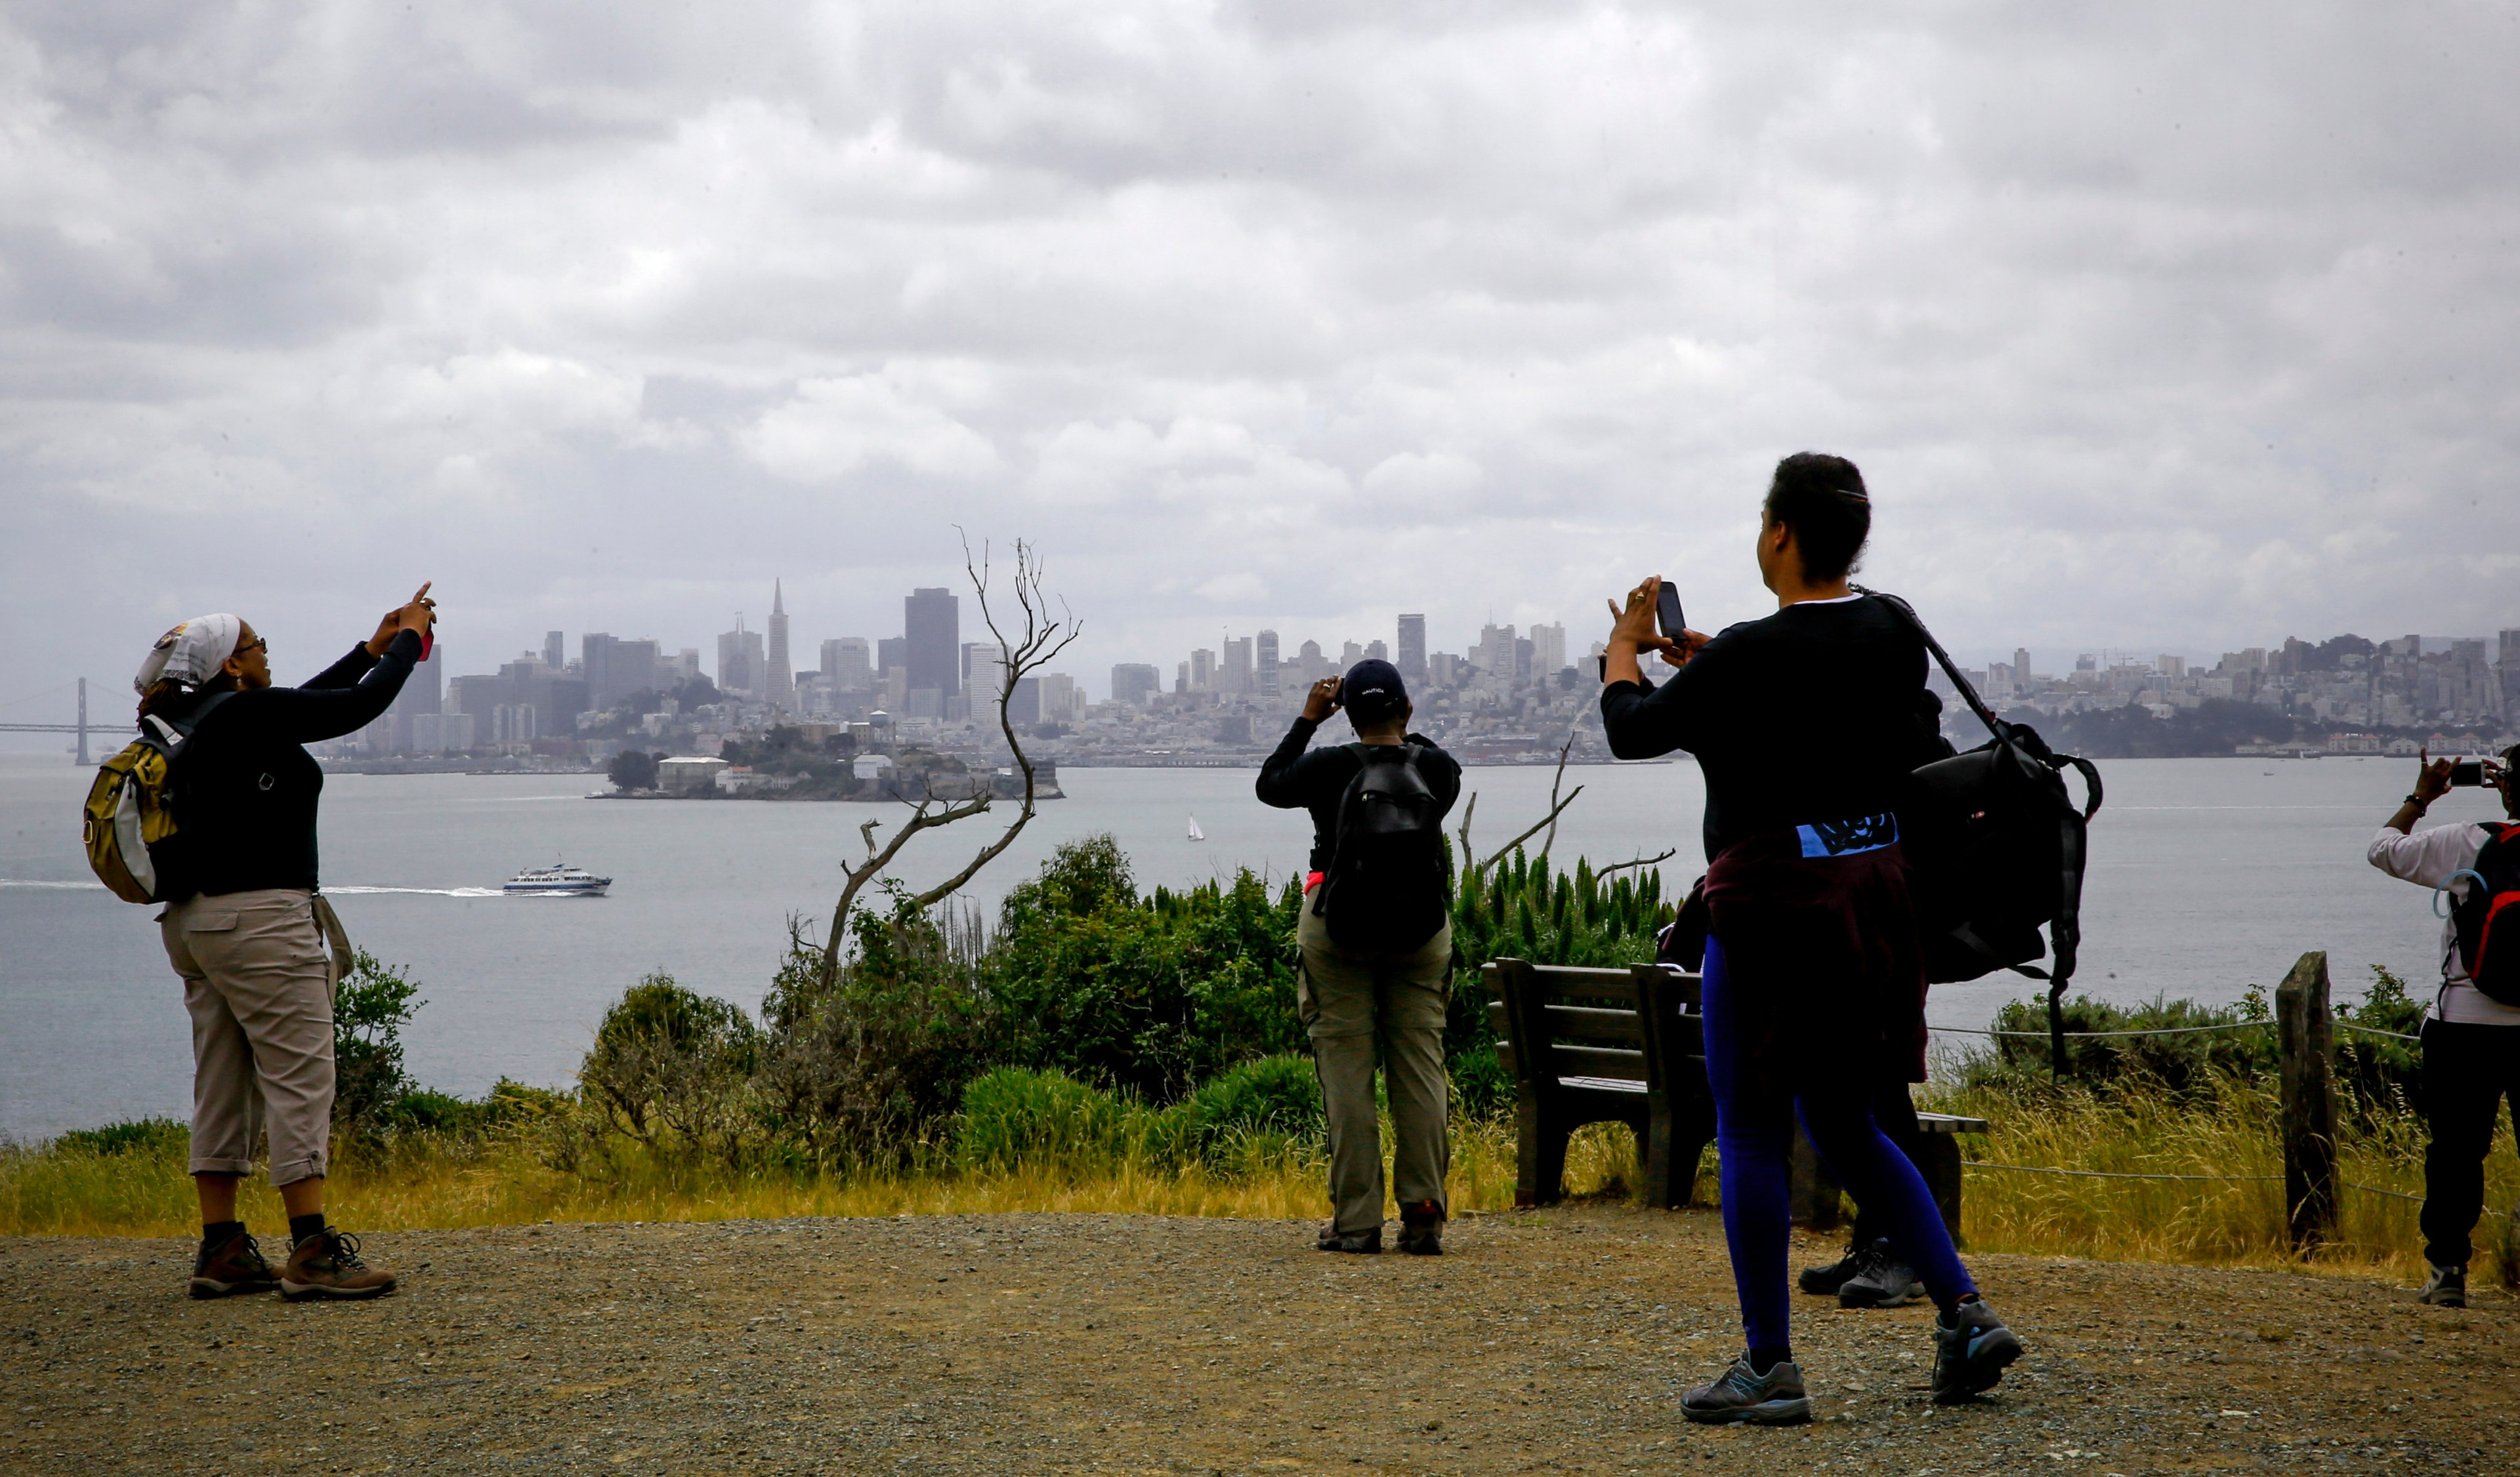 Several people are taking photos with smartphones against a city skyline, with water and a boat visible in the foreground.